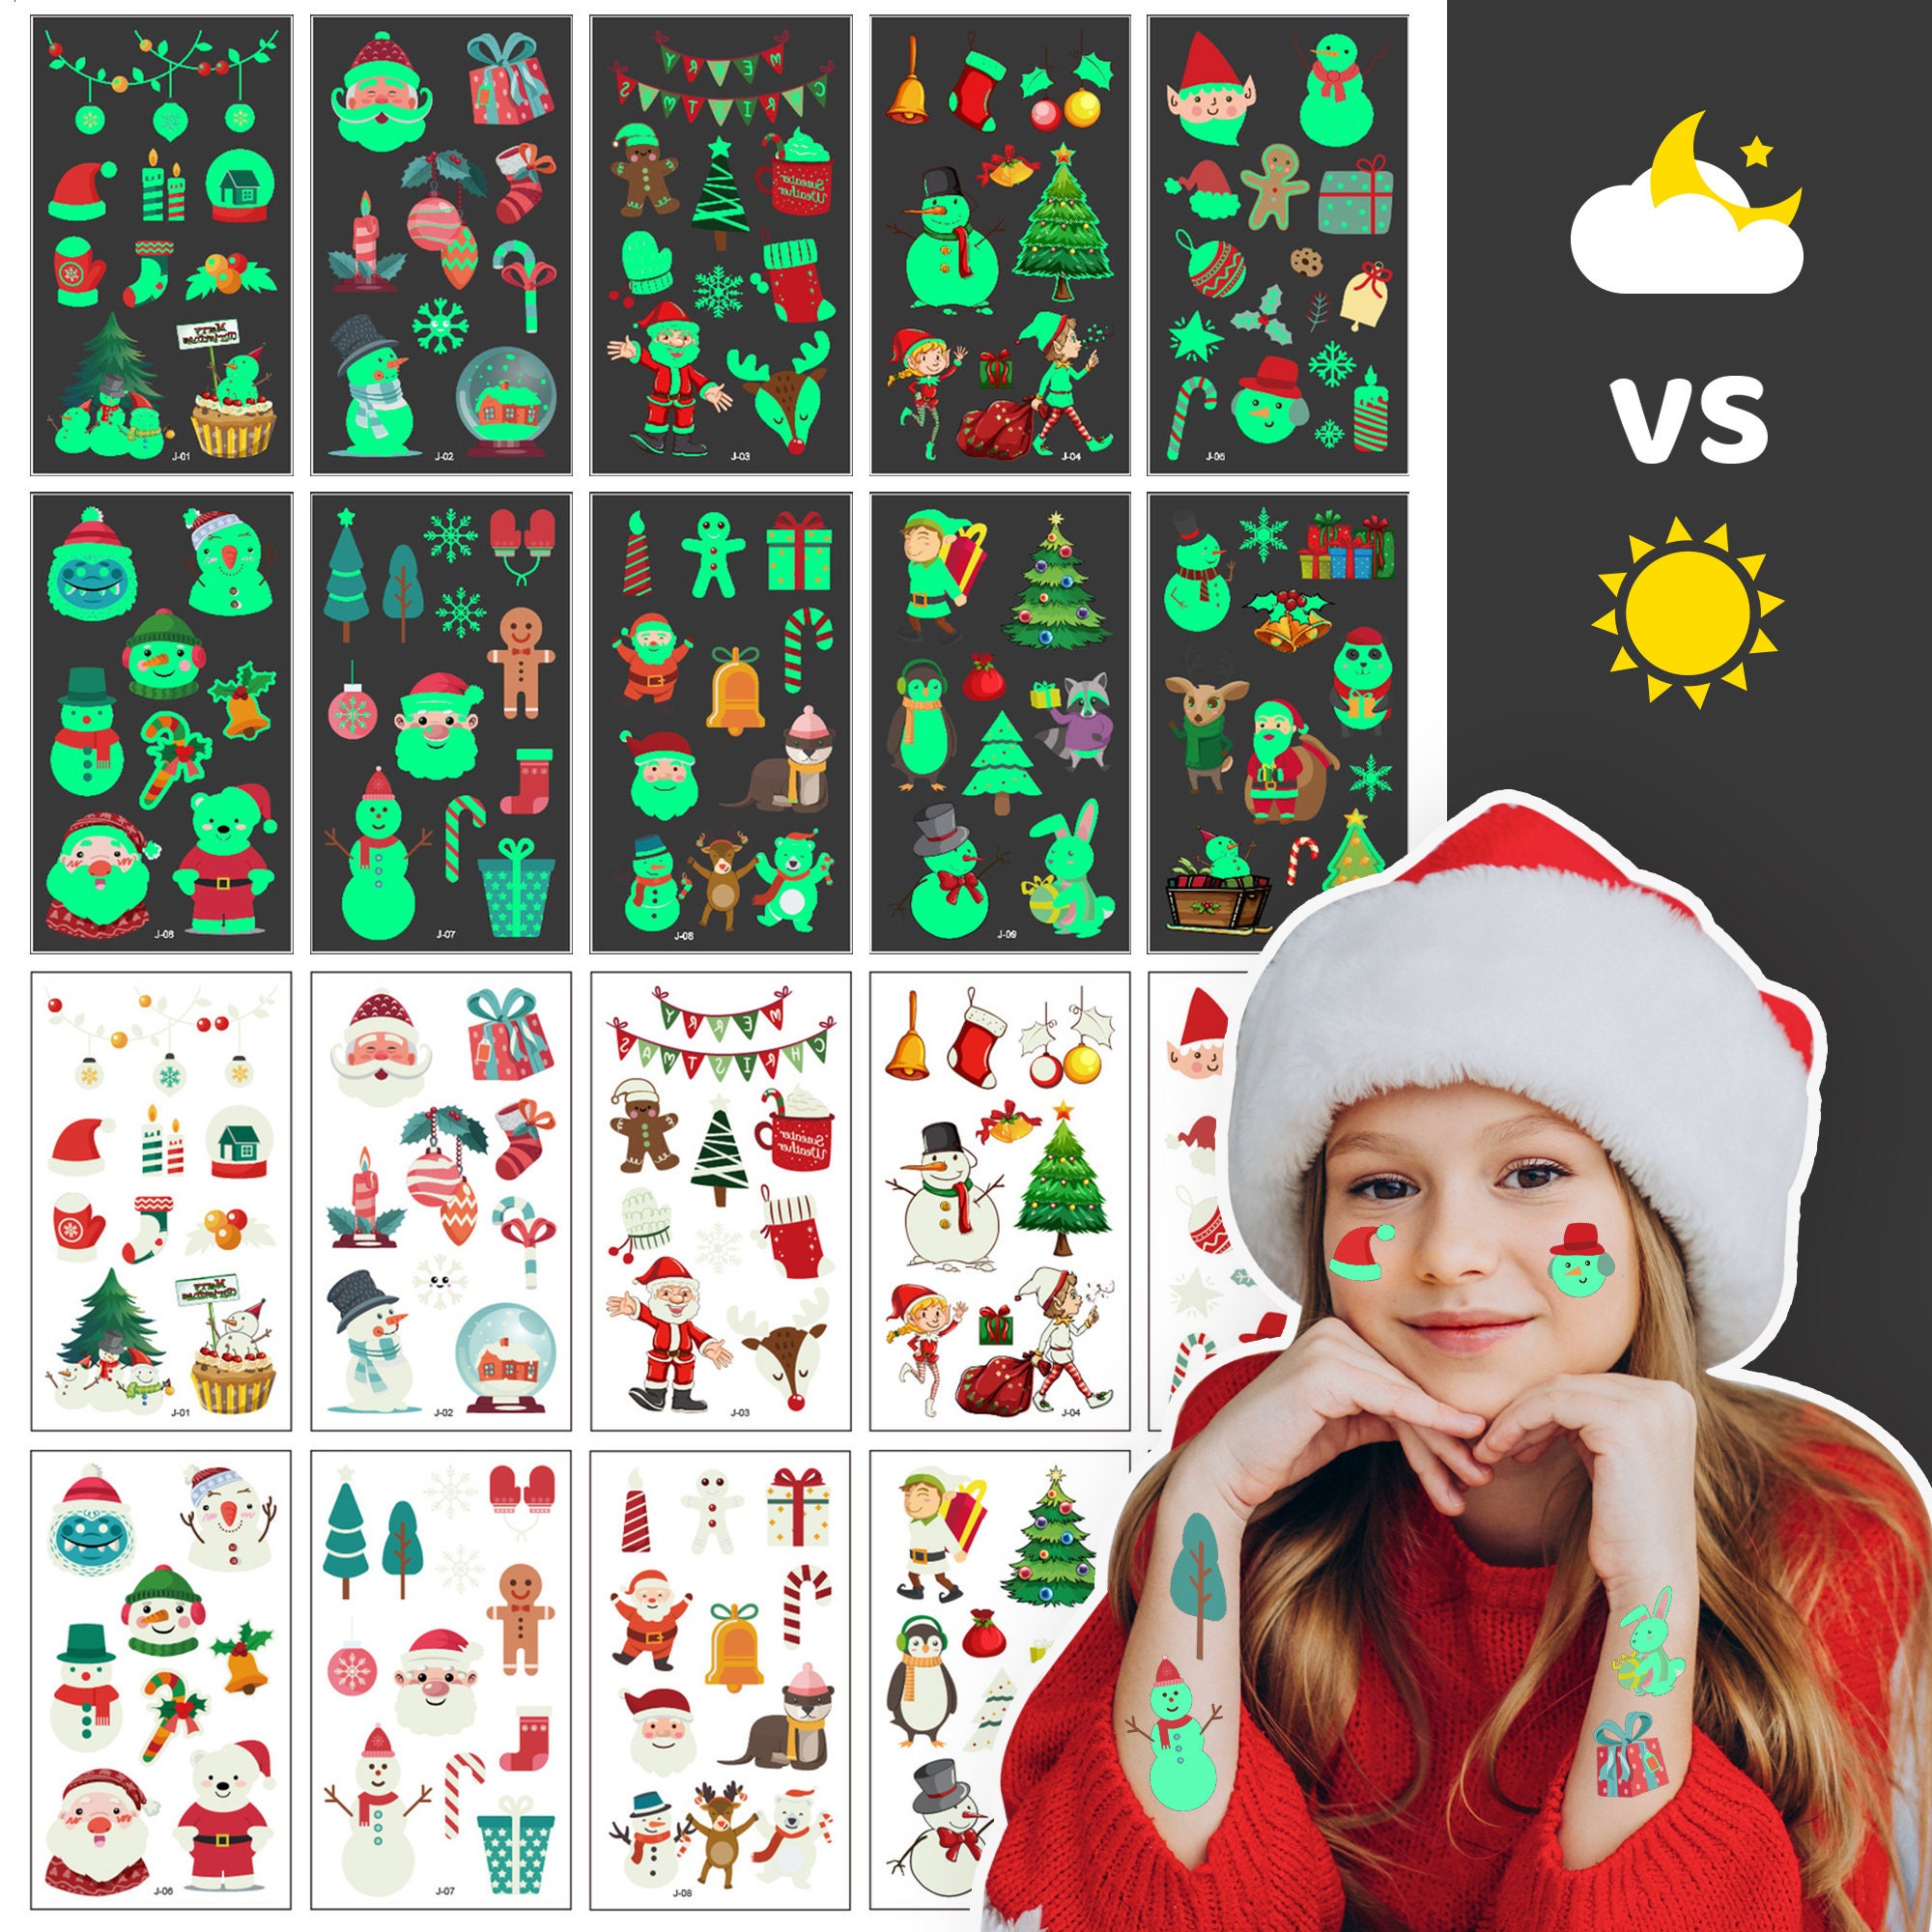  Christmas Temporary Tattoos Stocking Stuffers for Kids Boys  Girls, Glow in the Night Dark Kids Tattoos, Christmas Party Favors Supplies  Decorations, Christmas Fun Dollar Items for Kids (10 sheets) : Toys